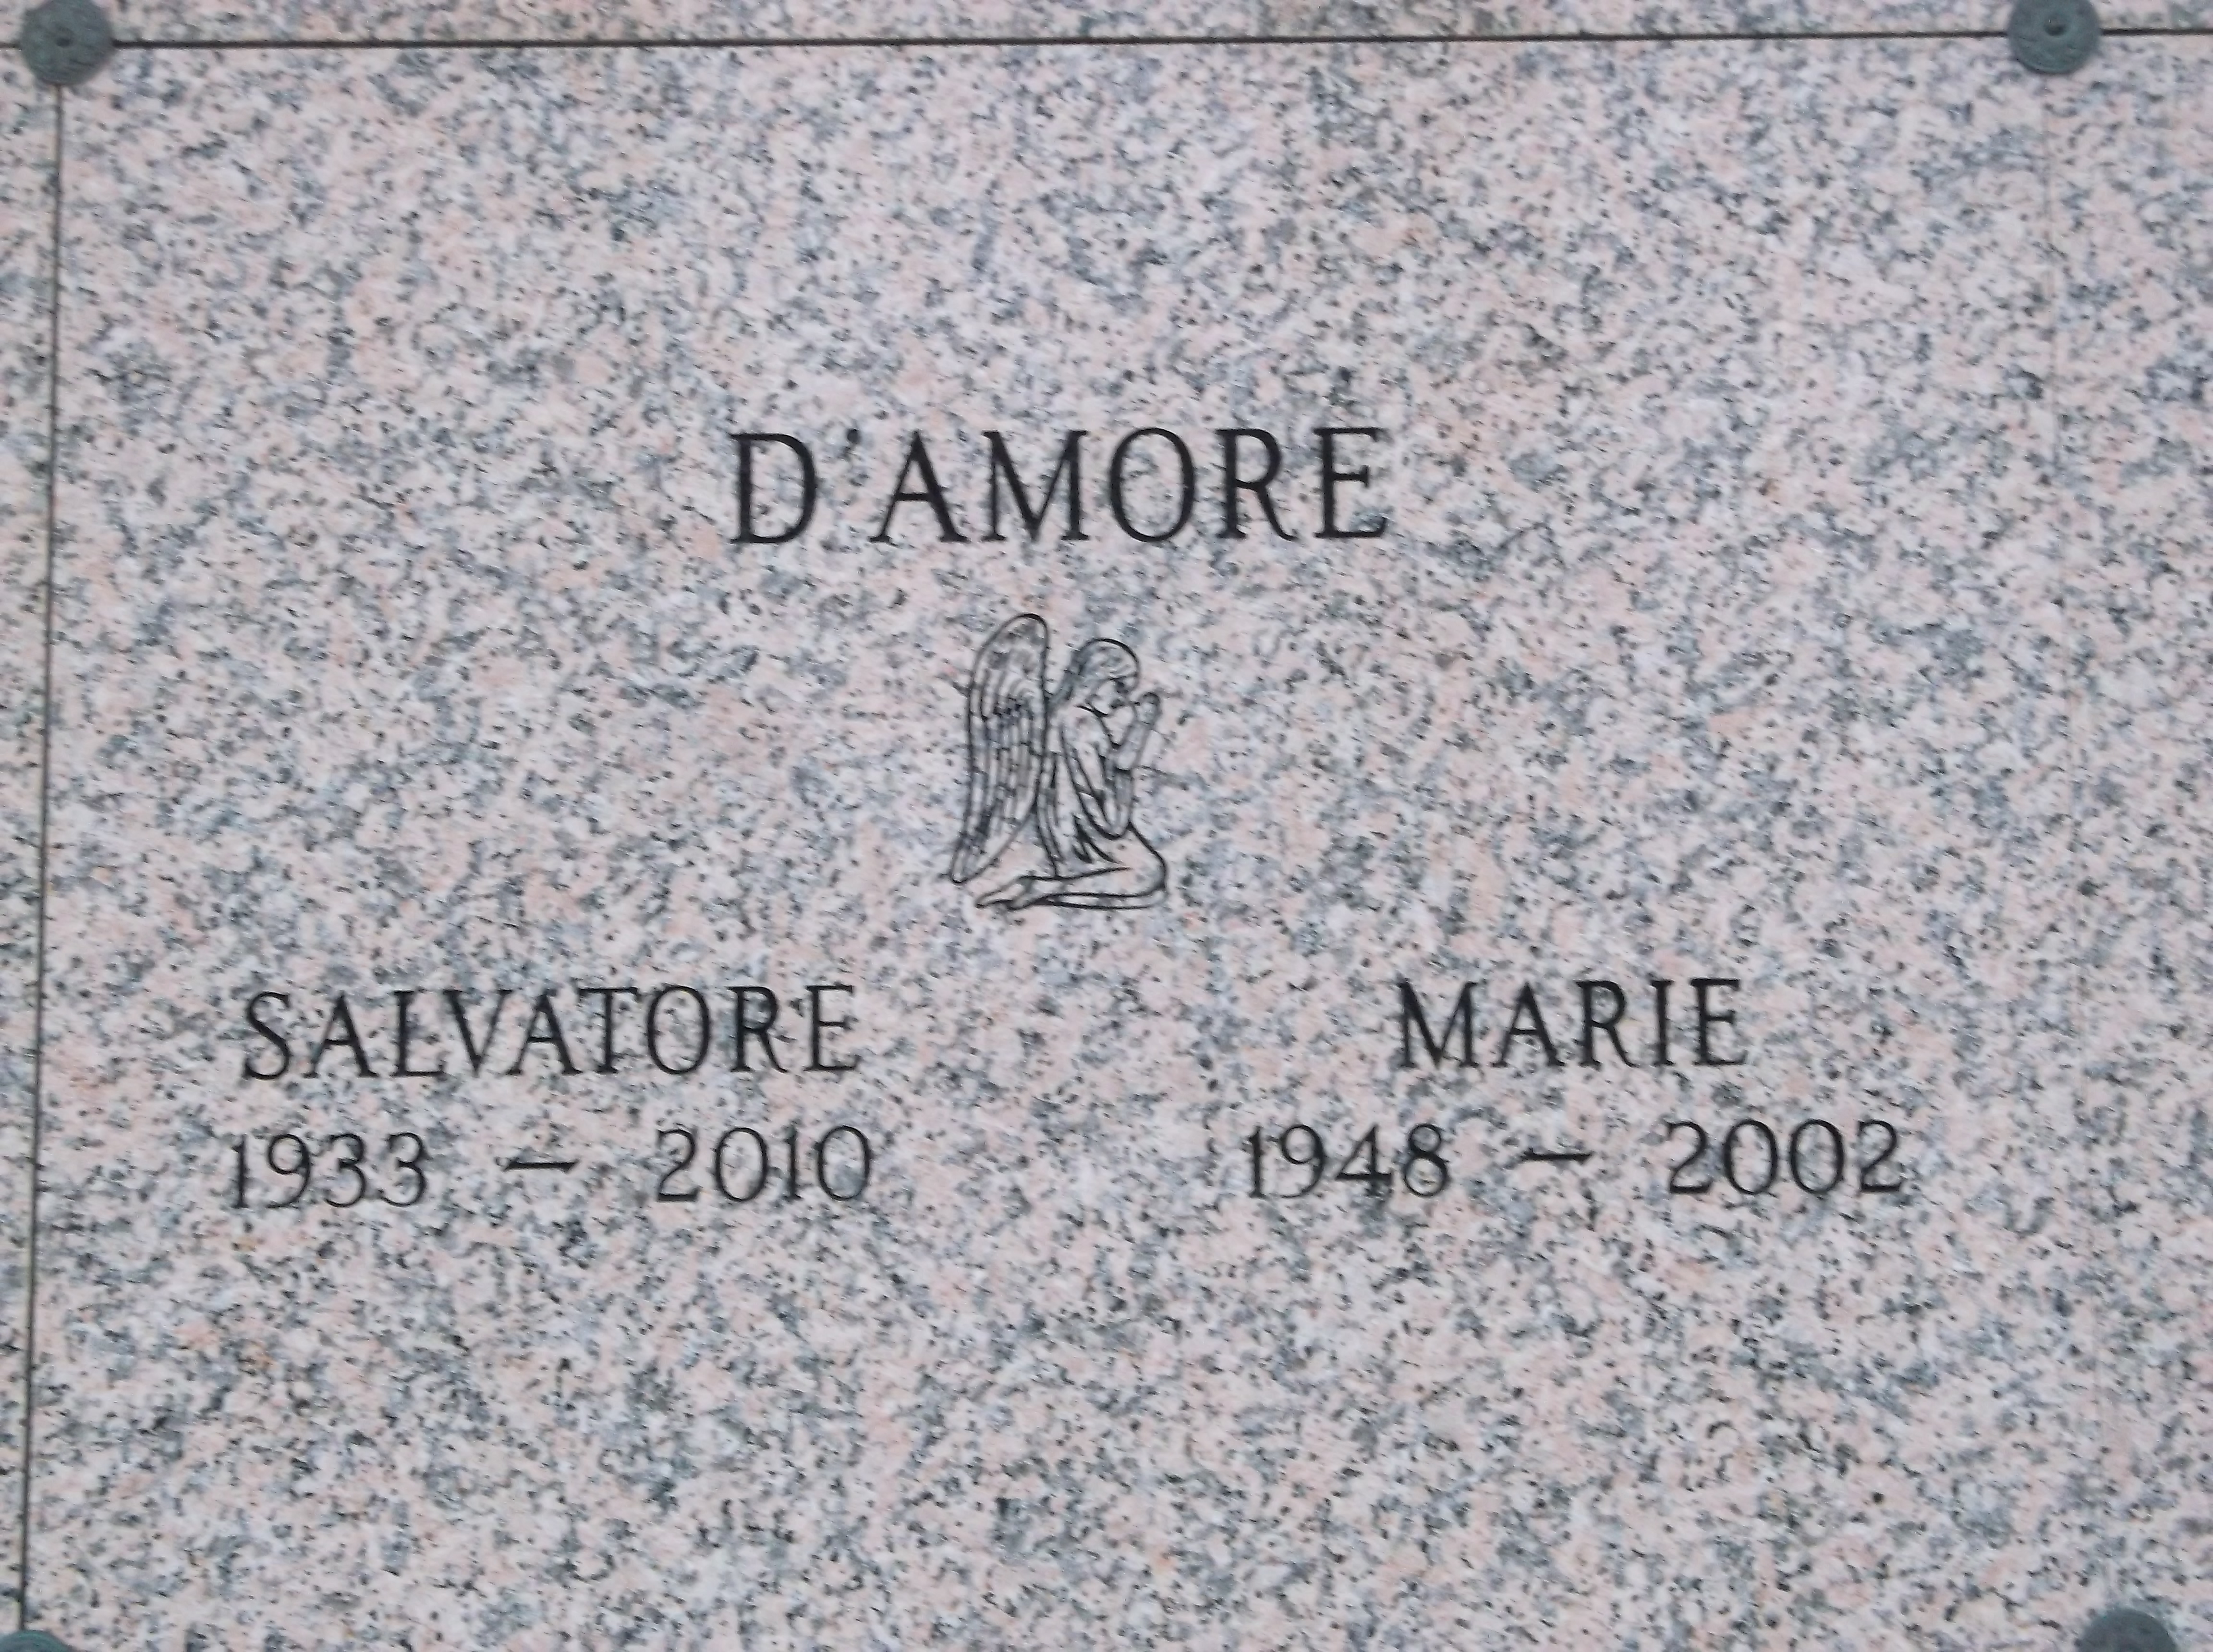 Marie D'Amore